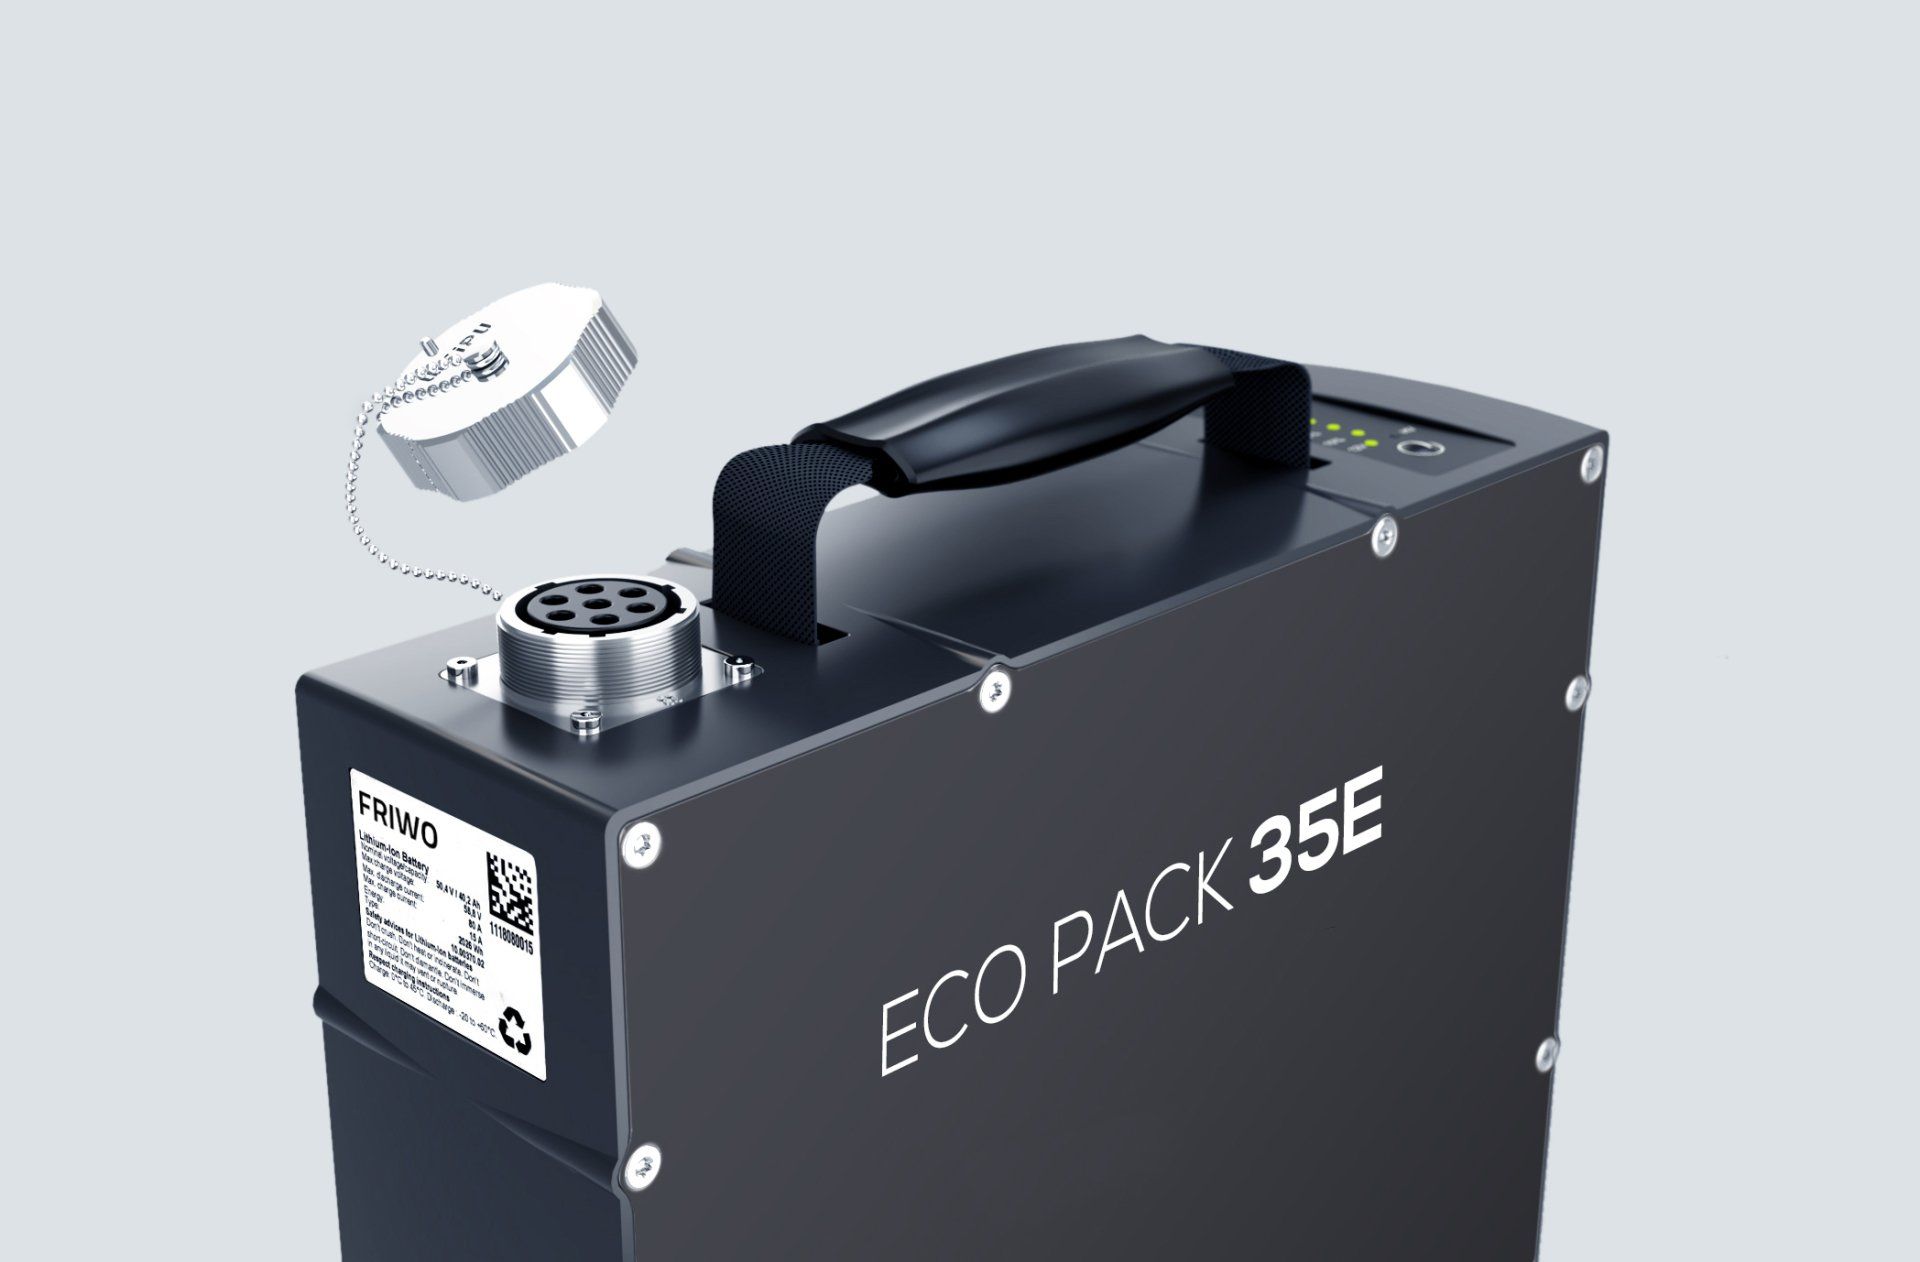 A battery pack with the word eco pack 35e on it